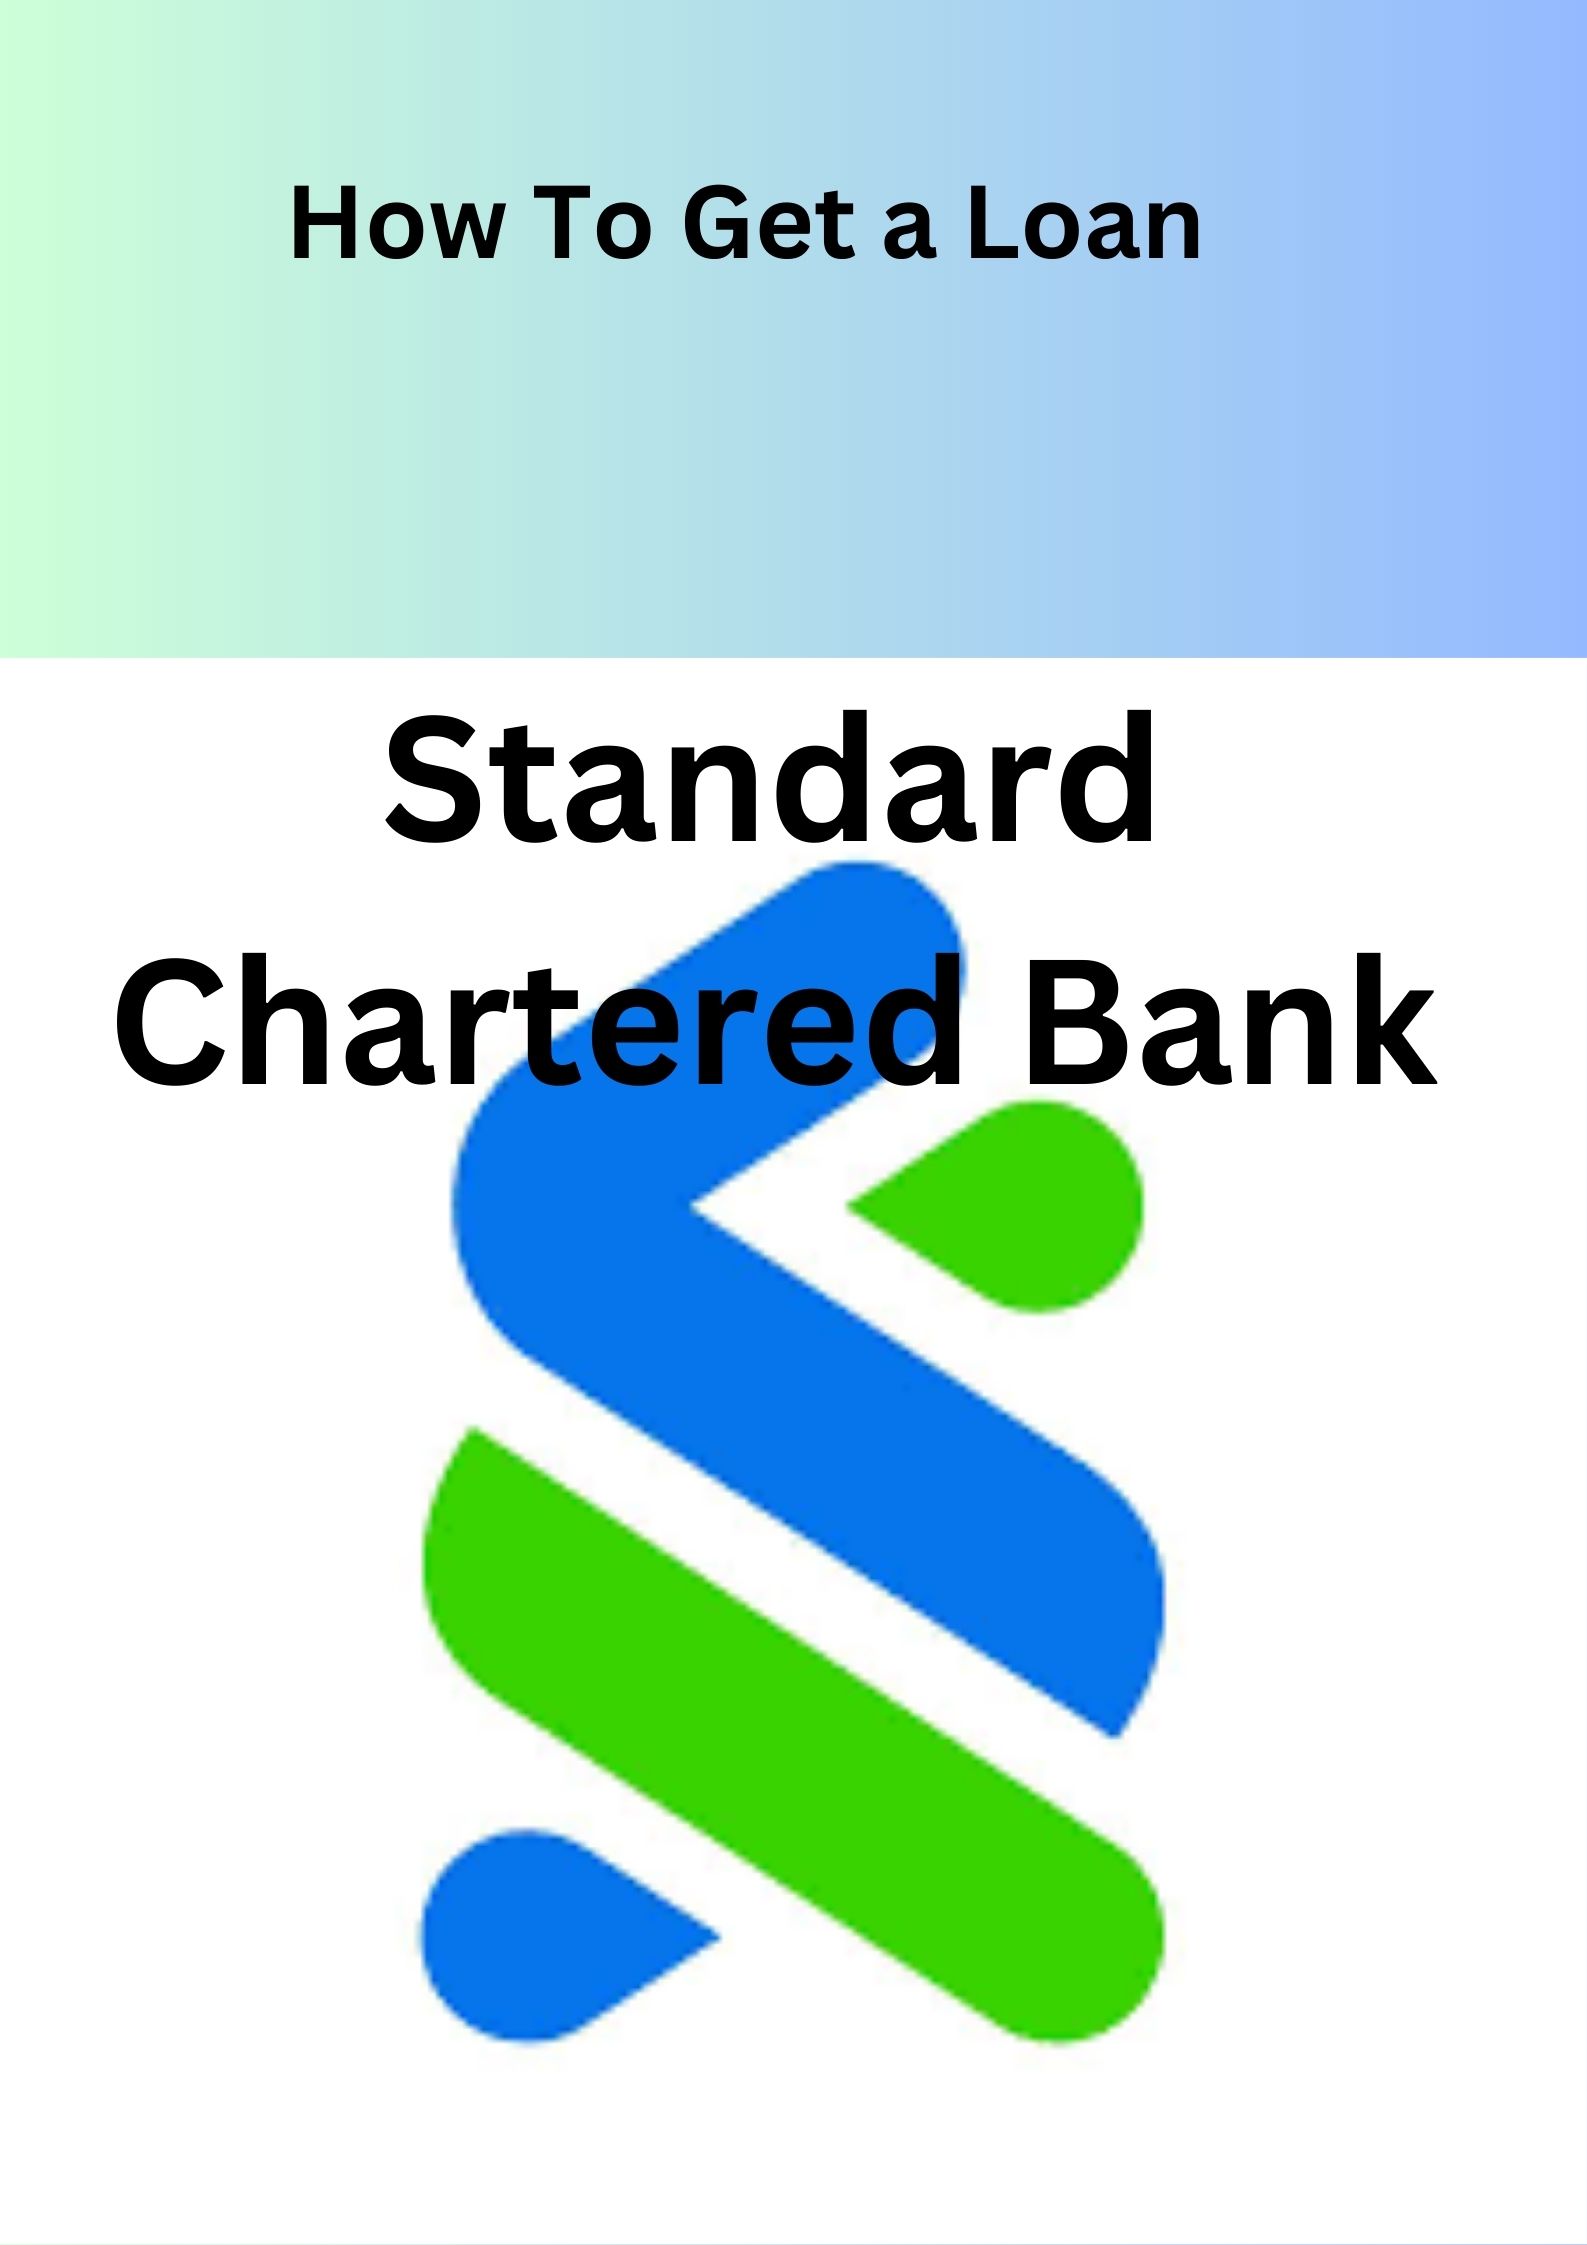 How To Apply For Loan In Standard Chartered Bank: Requirements, Procedures